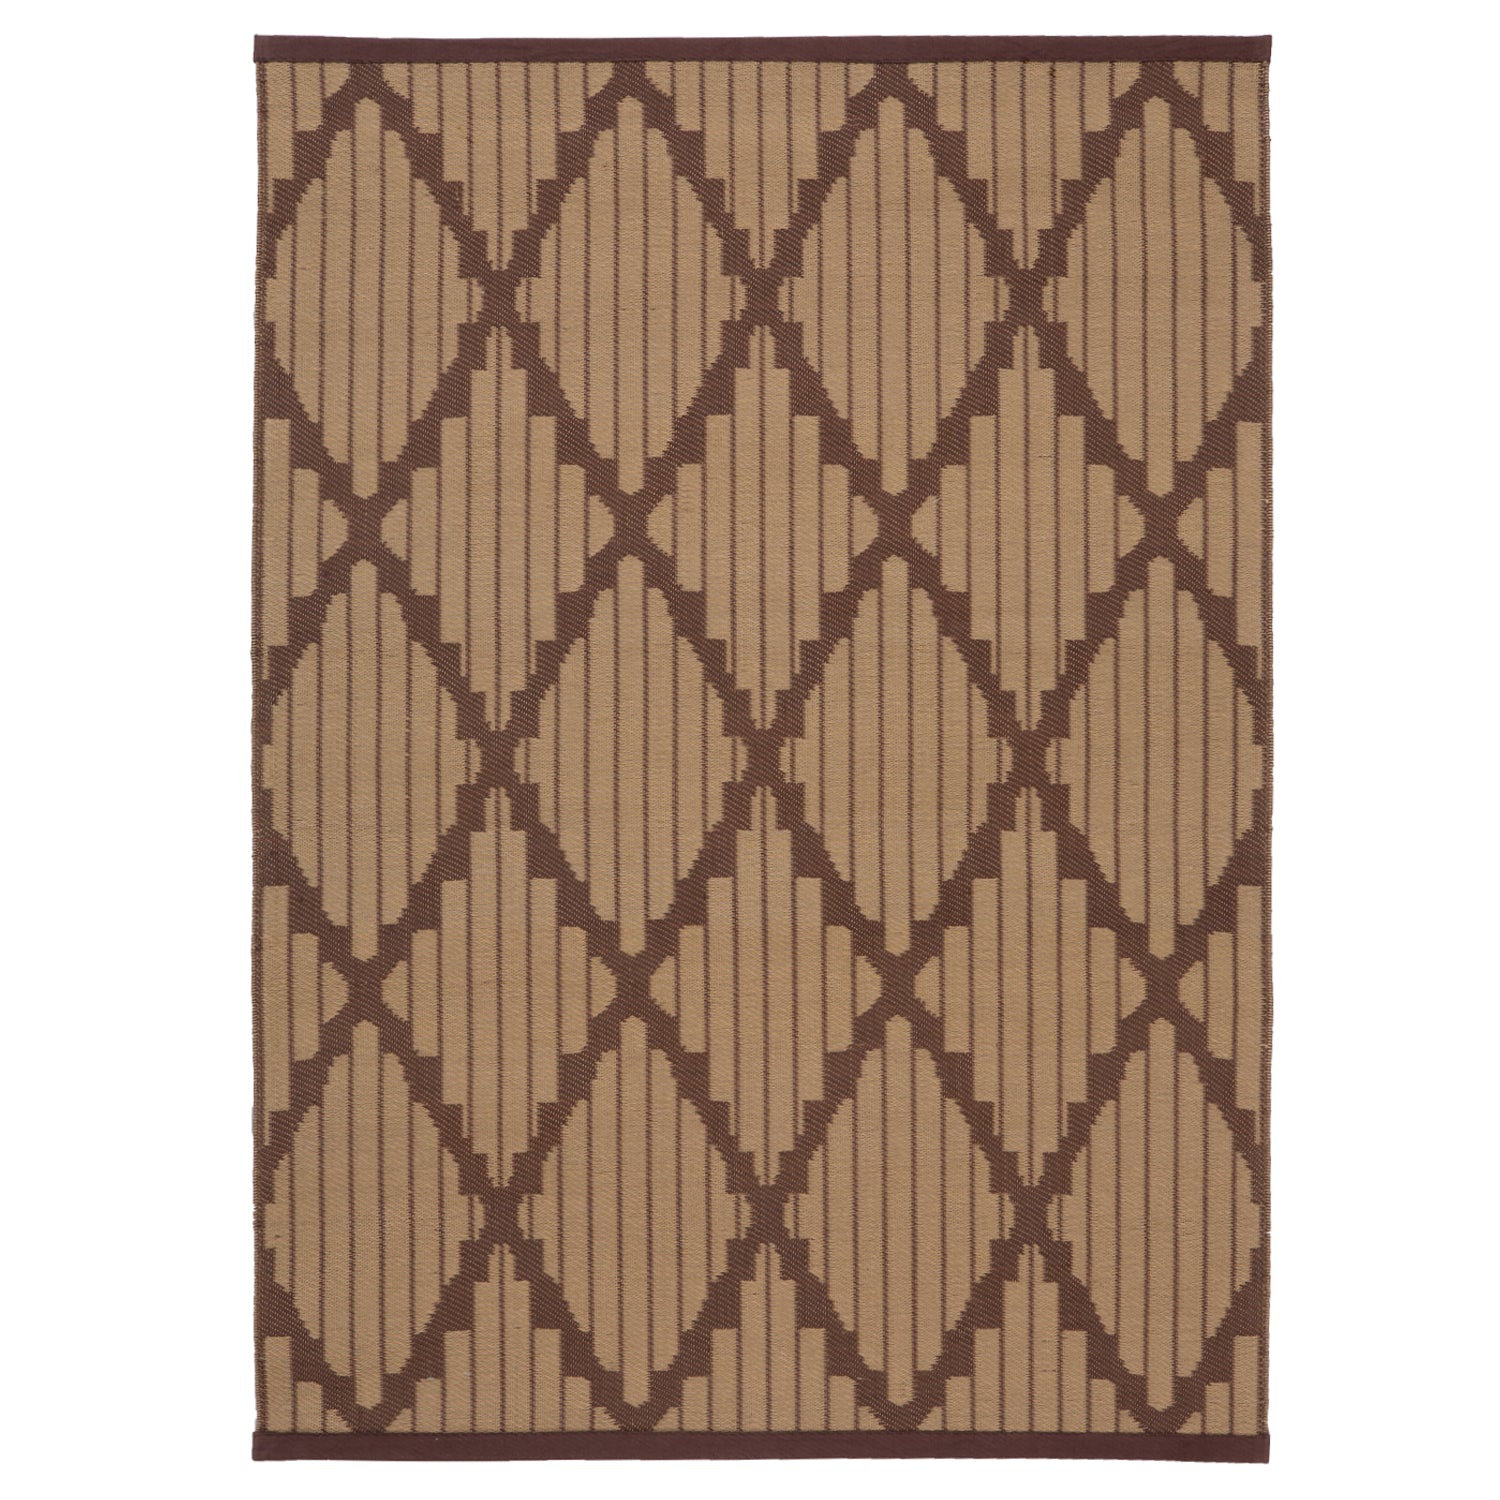 Rectangular rug with symmetrical geometric pattern in neutral colors.